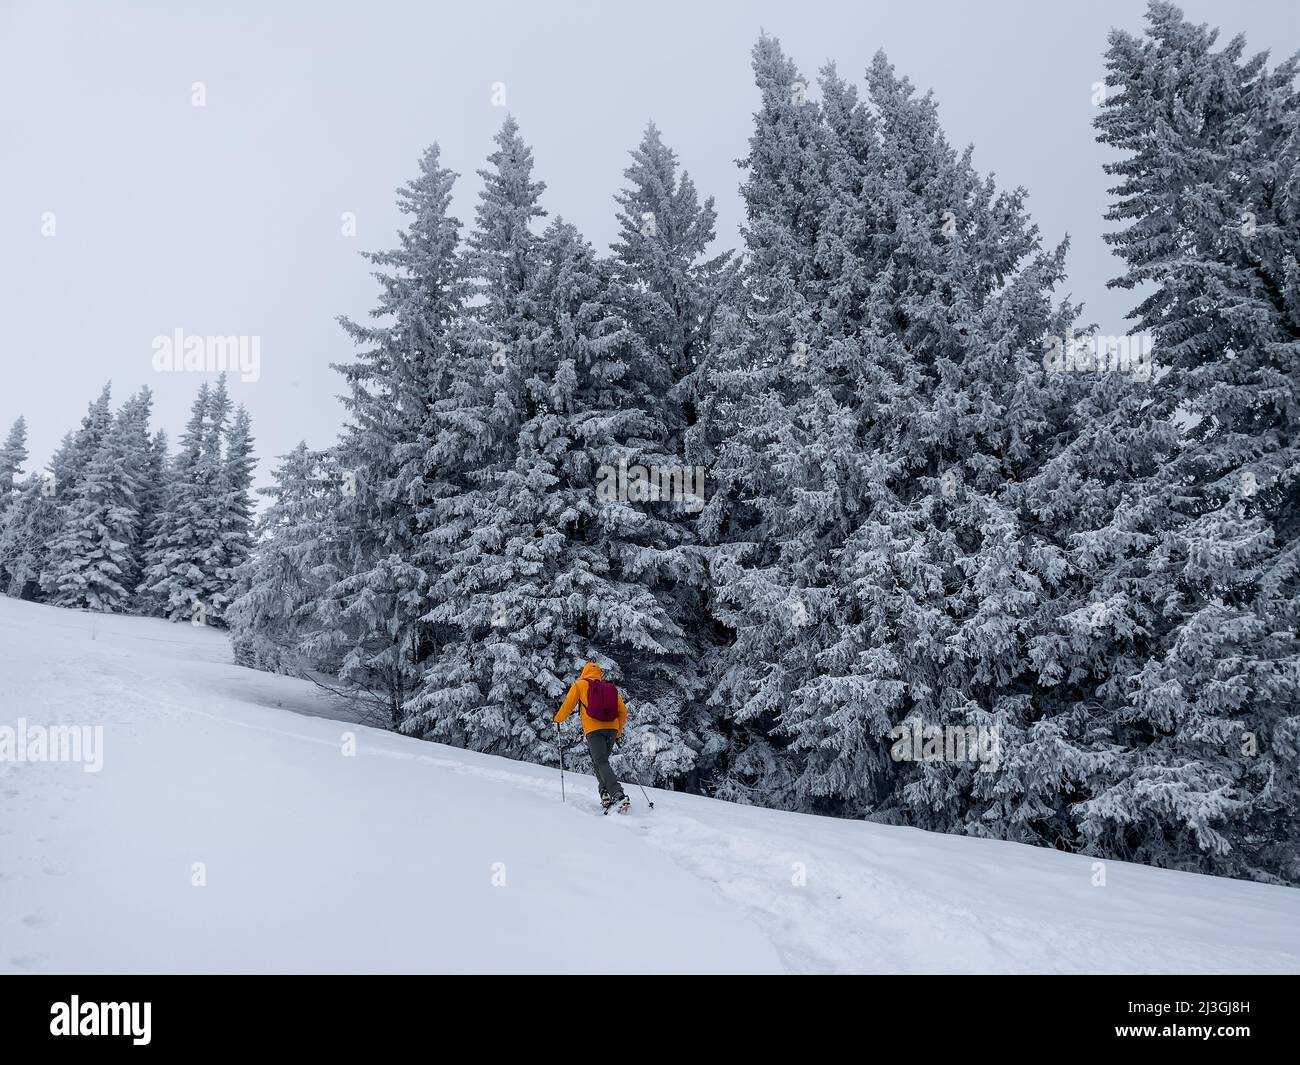 Lonely mountaineer dressed bright orange softshell jacket going up the snowy hill between spruces trees.  Active people concept image on Velky Krivan, Stock Photo